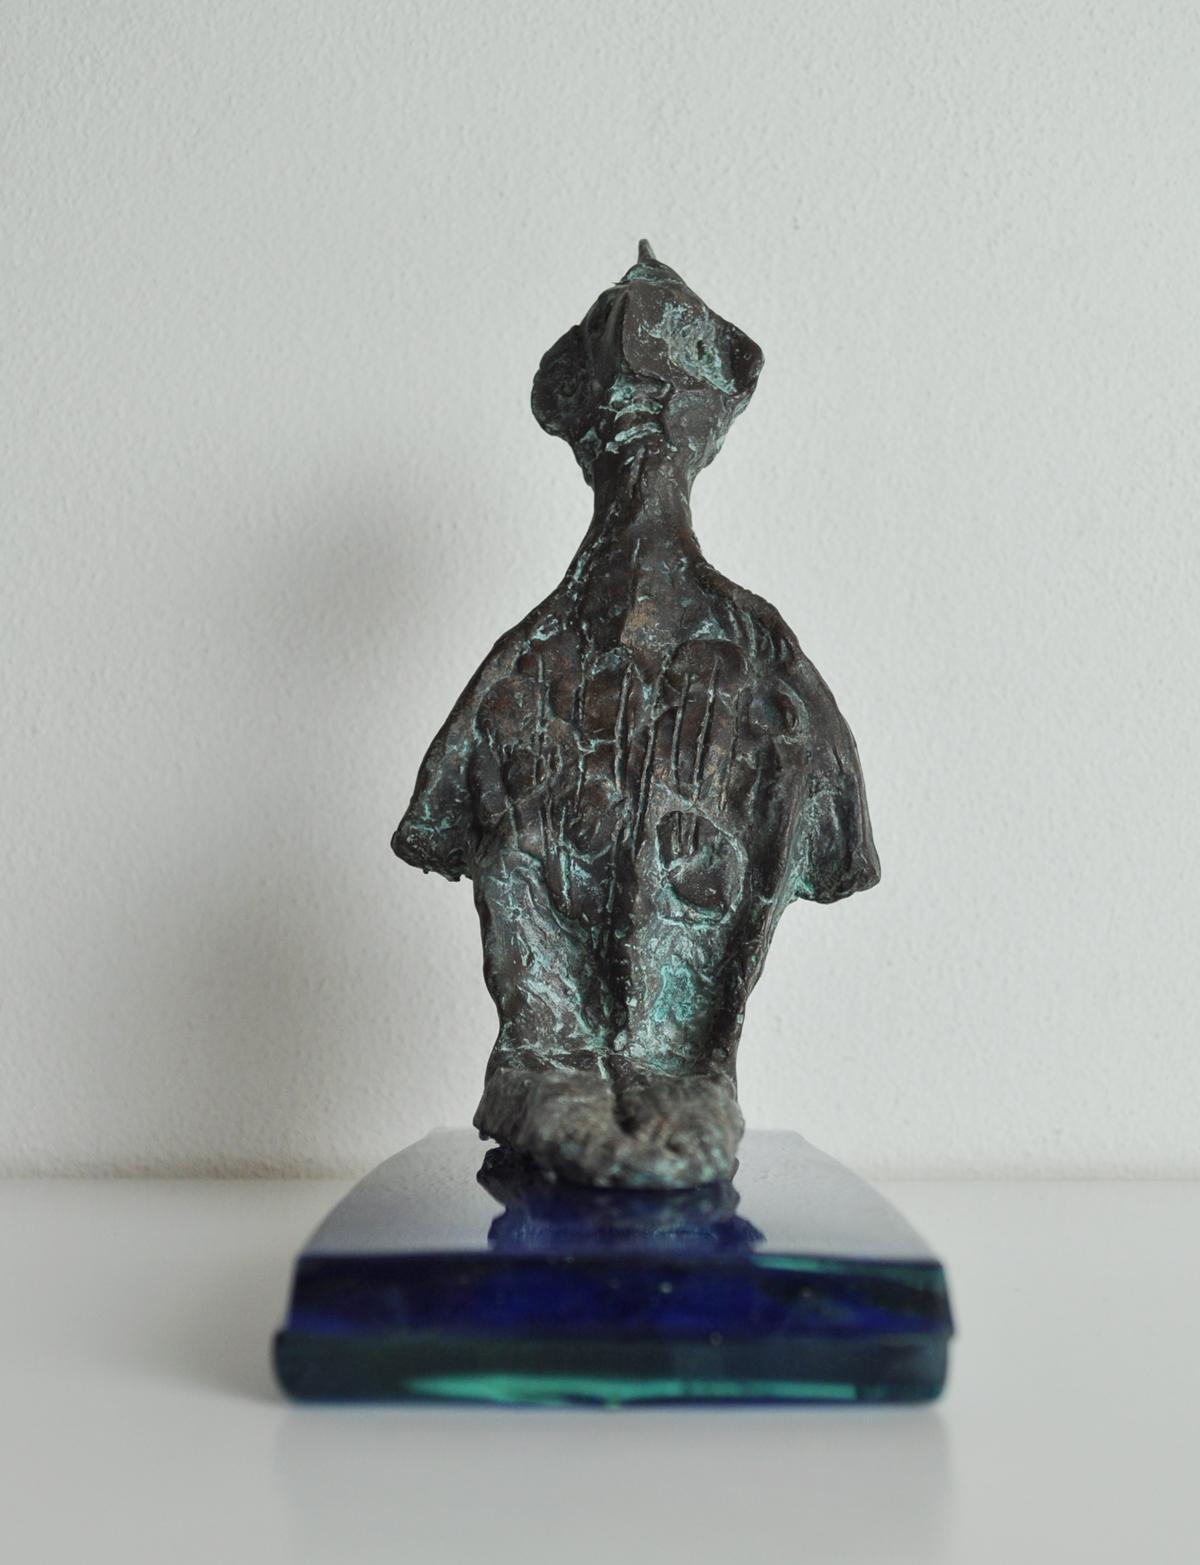 Carl-Henning Pedersen, beautiful patined copper Sculpture from the 1990s,
19 cm H x 9 cm W x 17 cm D

Carl-Henning Pedersen (1913 – 2007) was a Danish painter and a key member and amongst the founders of the COBRA movement. 
Amongst others he was